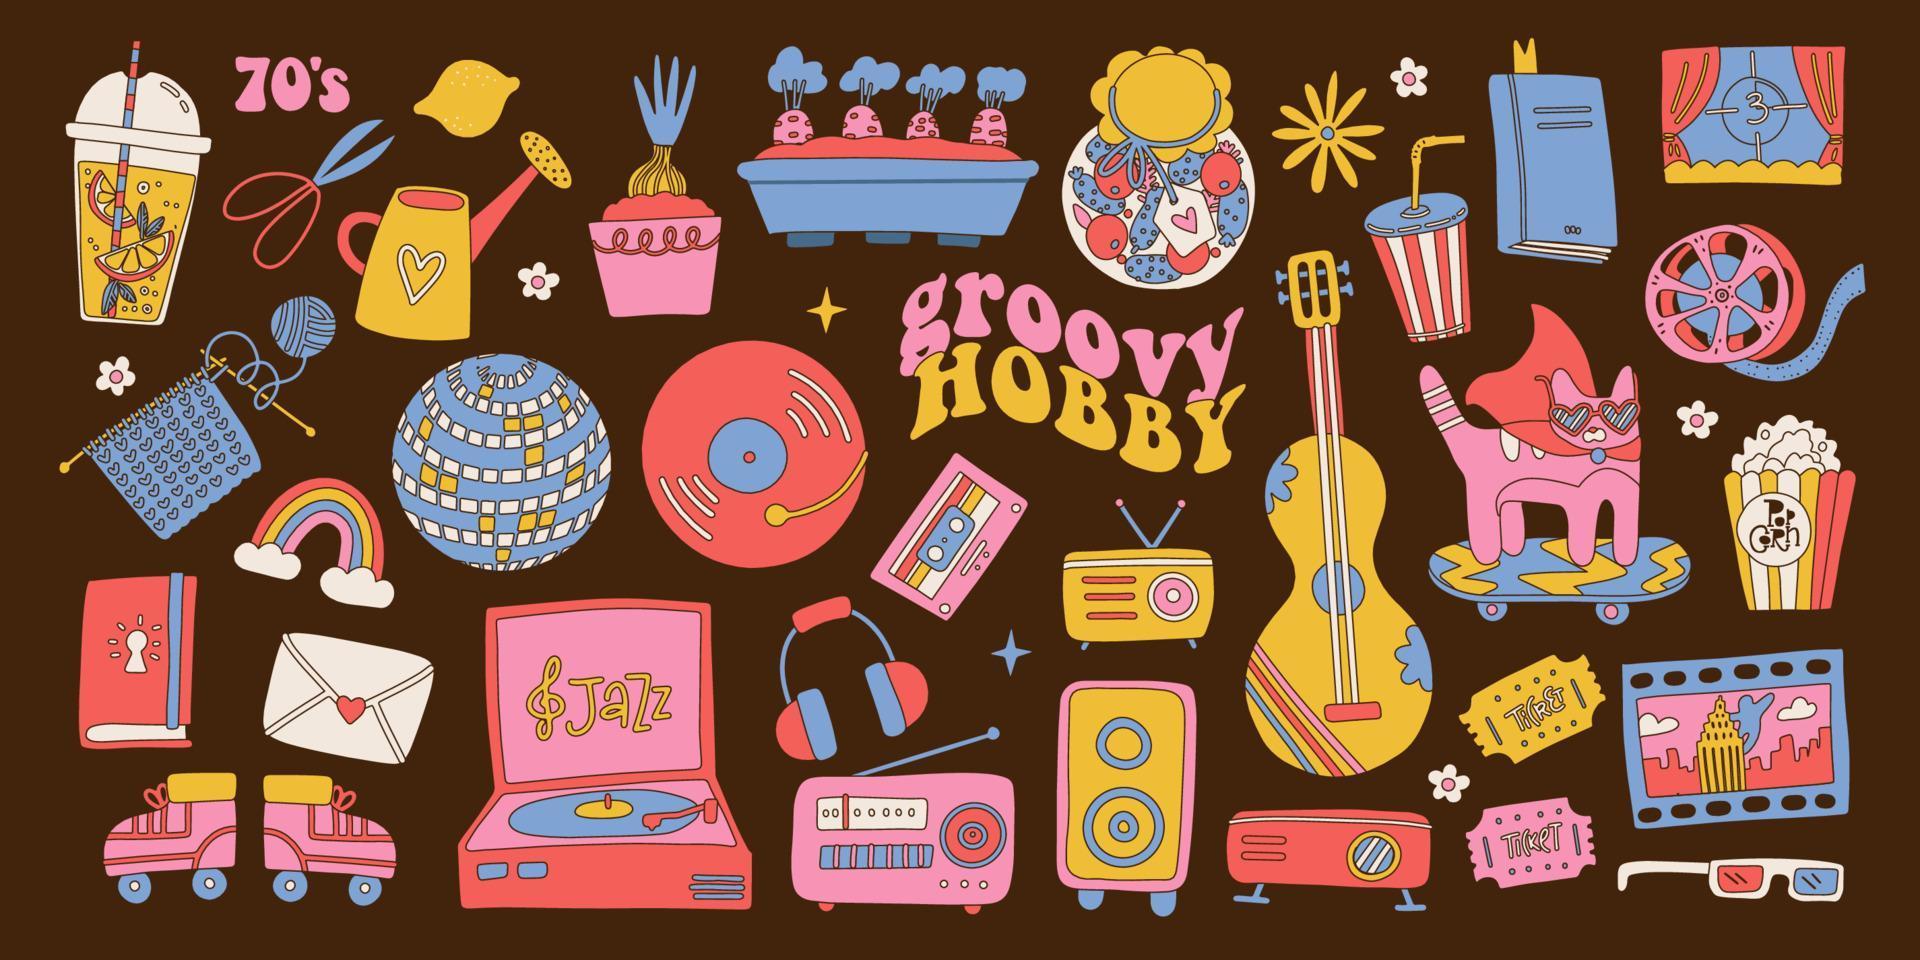 Set of groovy hobby objects. Hippie retro elements. Collection of cute 80s, 90s nostalgia stickers. Vintage cinema, music, bookks, gardening, skating, film objects. Trendy oldschool graphic vector